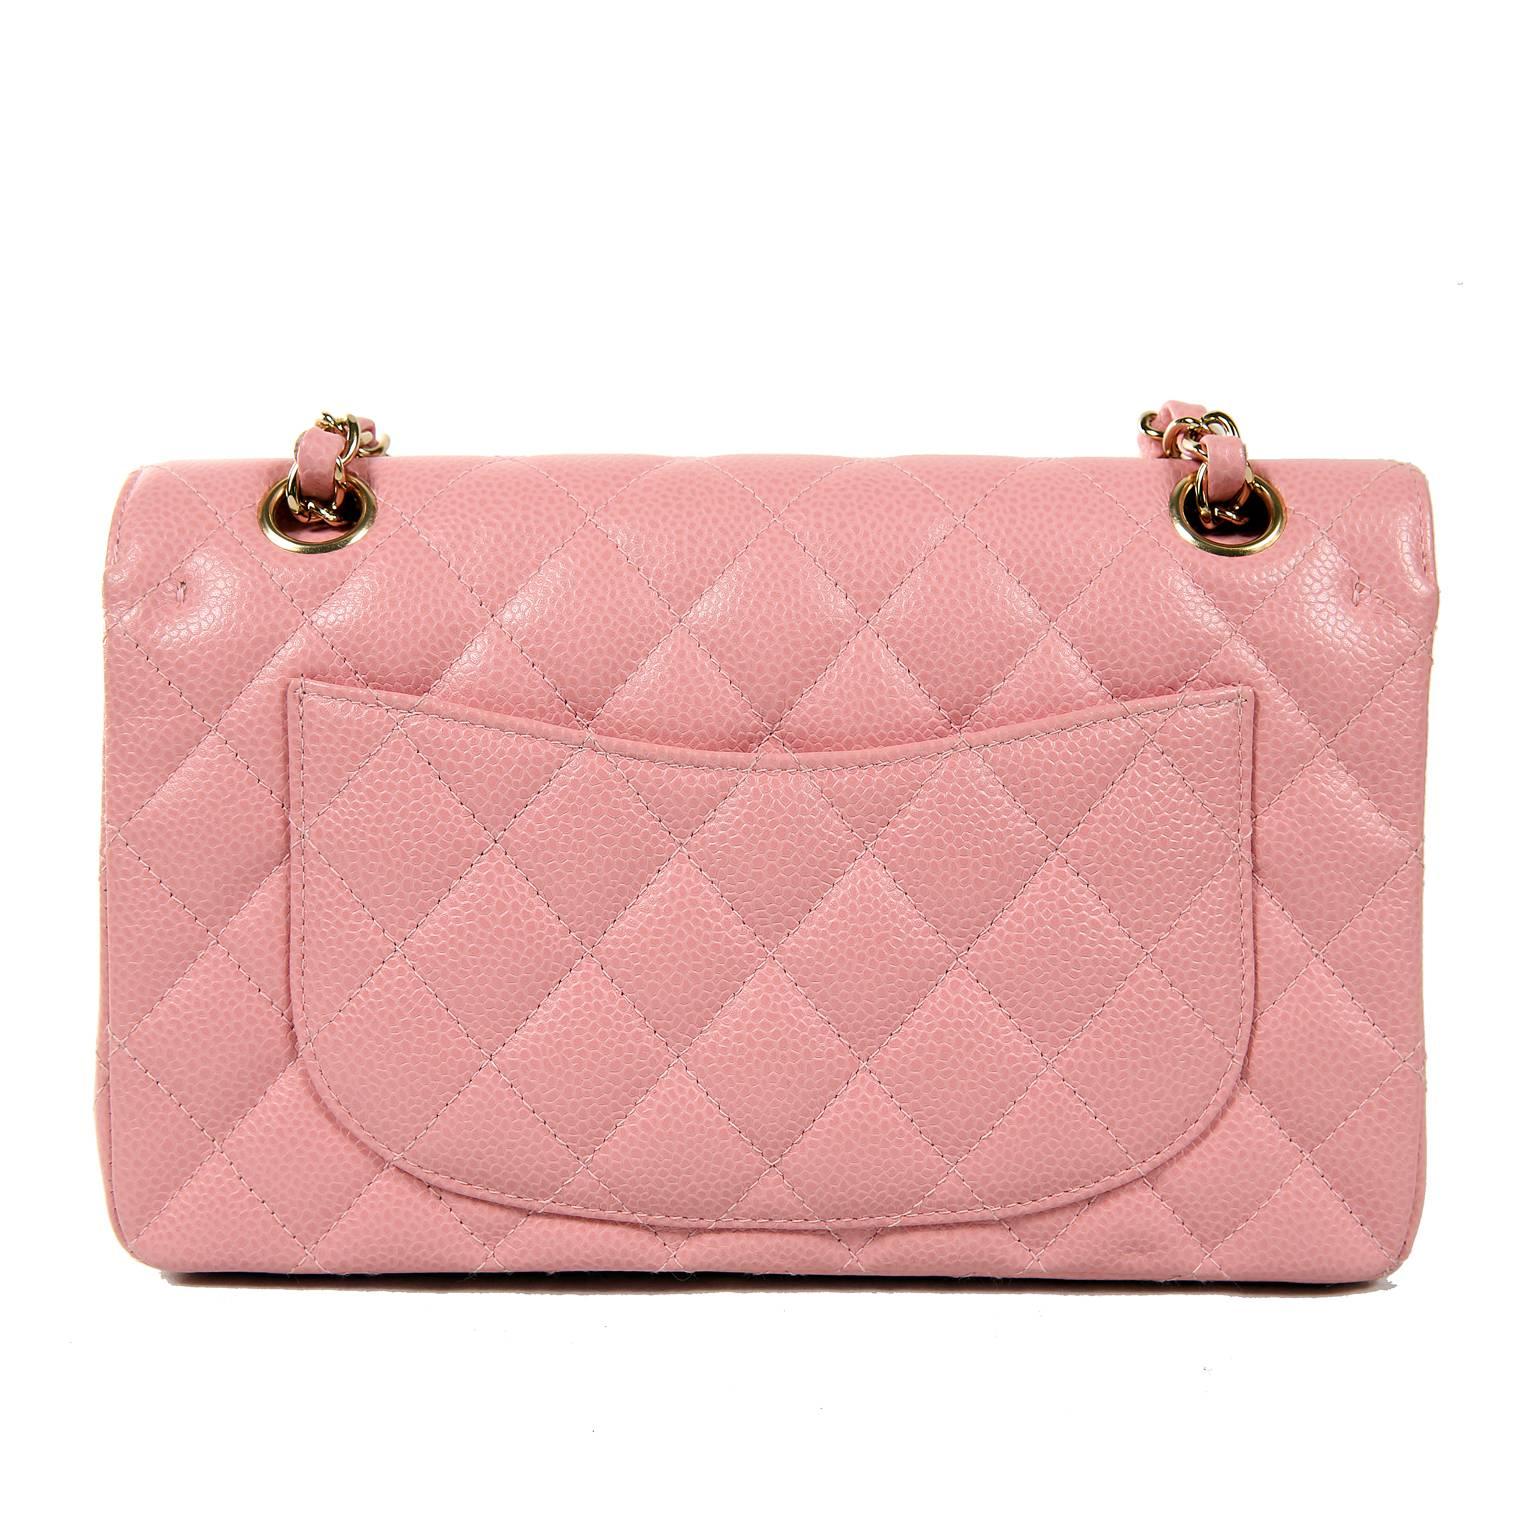 Pink Caviar Medium Classic Flap Bag-  PRISTINE
Never carried and carefully stored, this stunning Chanel elevates every ensemble. 
Durable and textured pink caviar leather is quilted in signature Chanel diamond pattern.  Gold interlocking CC twist